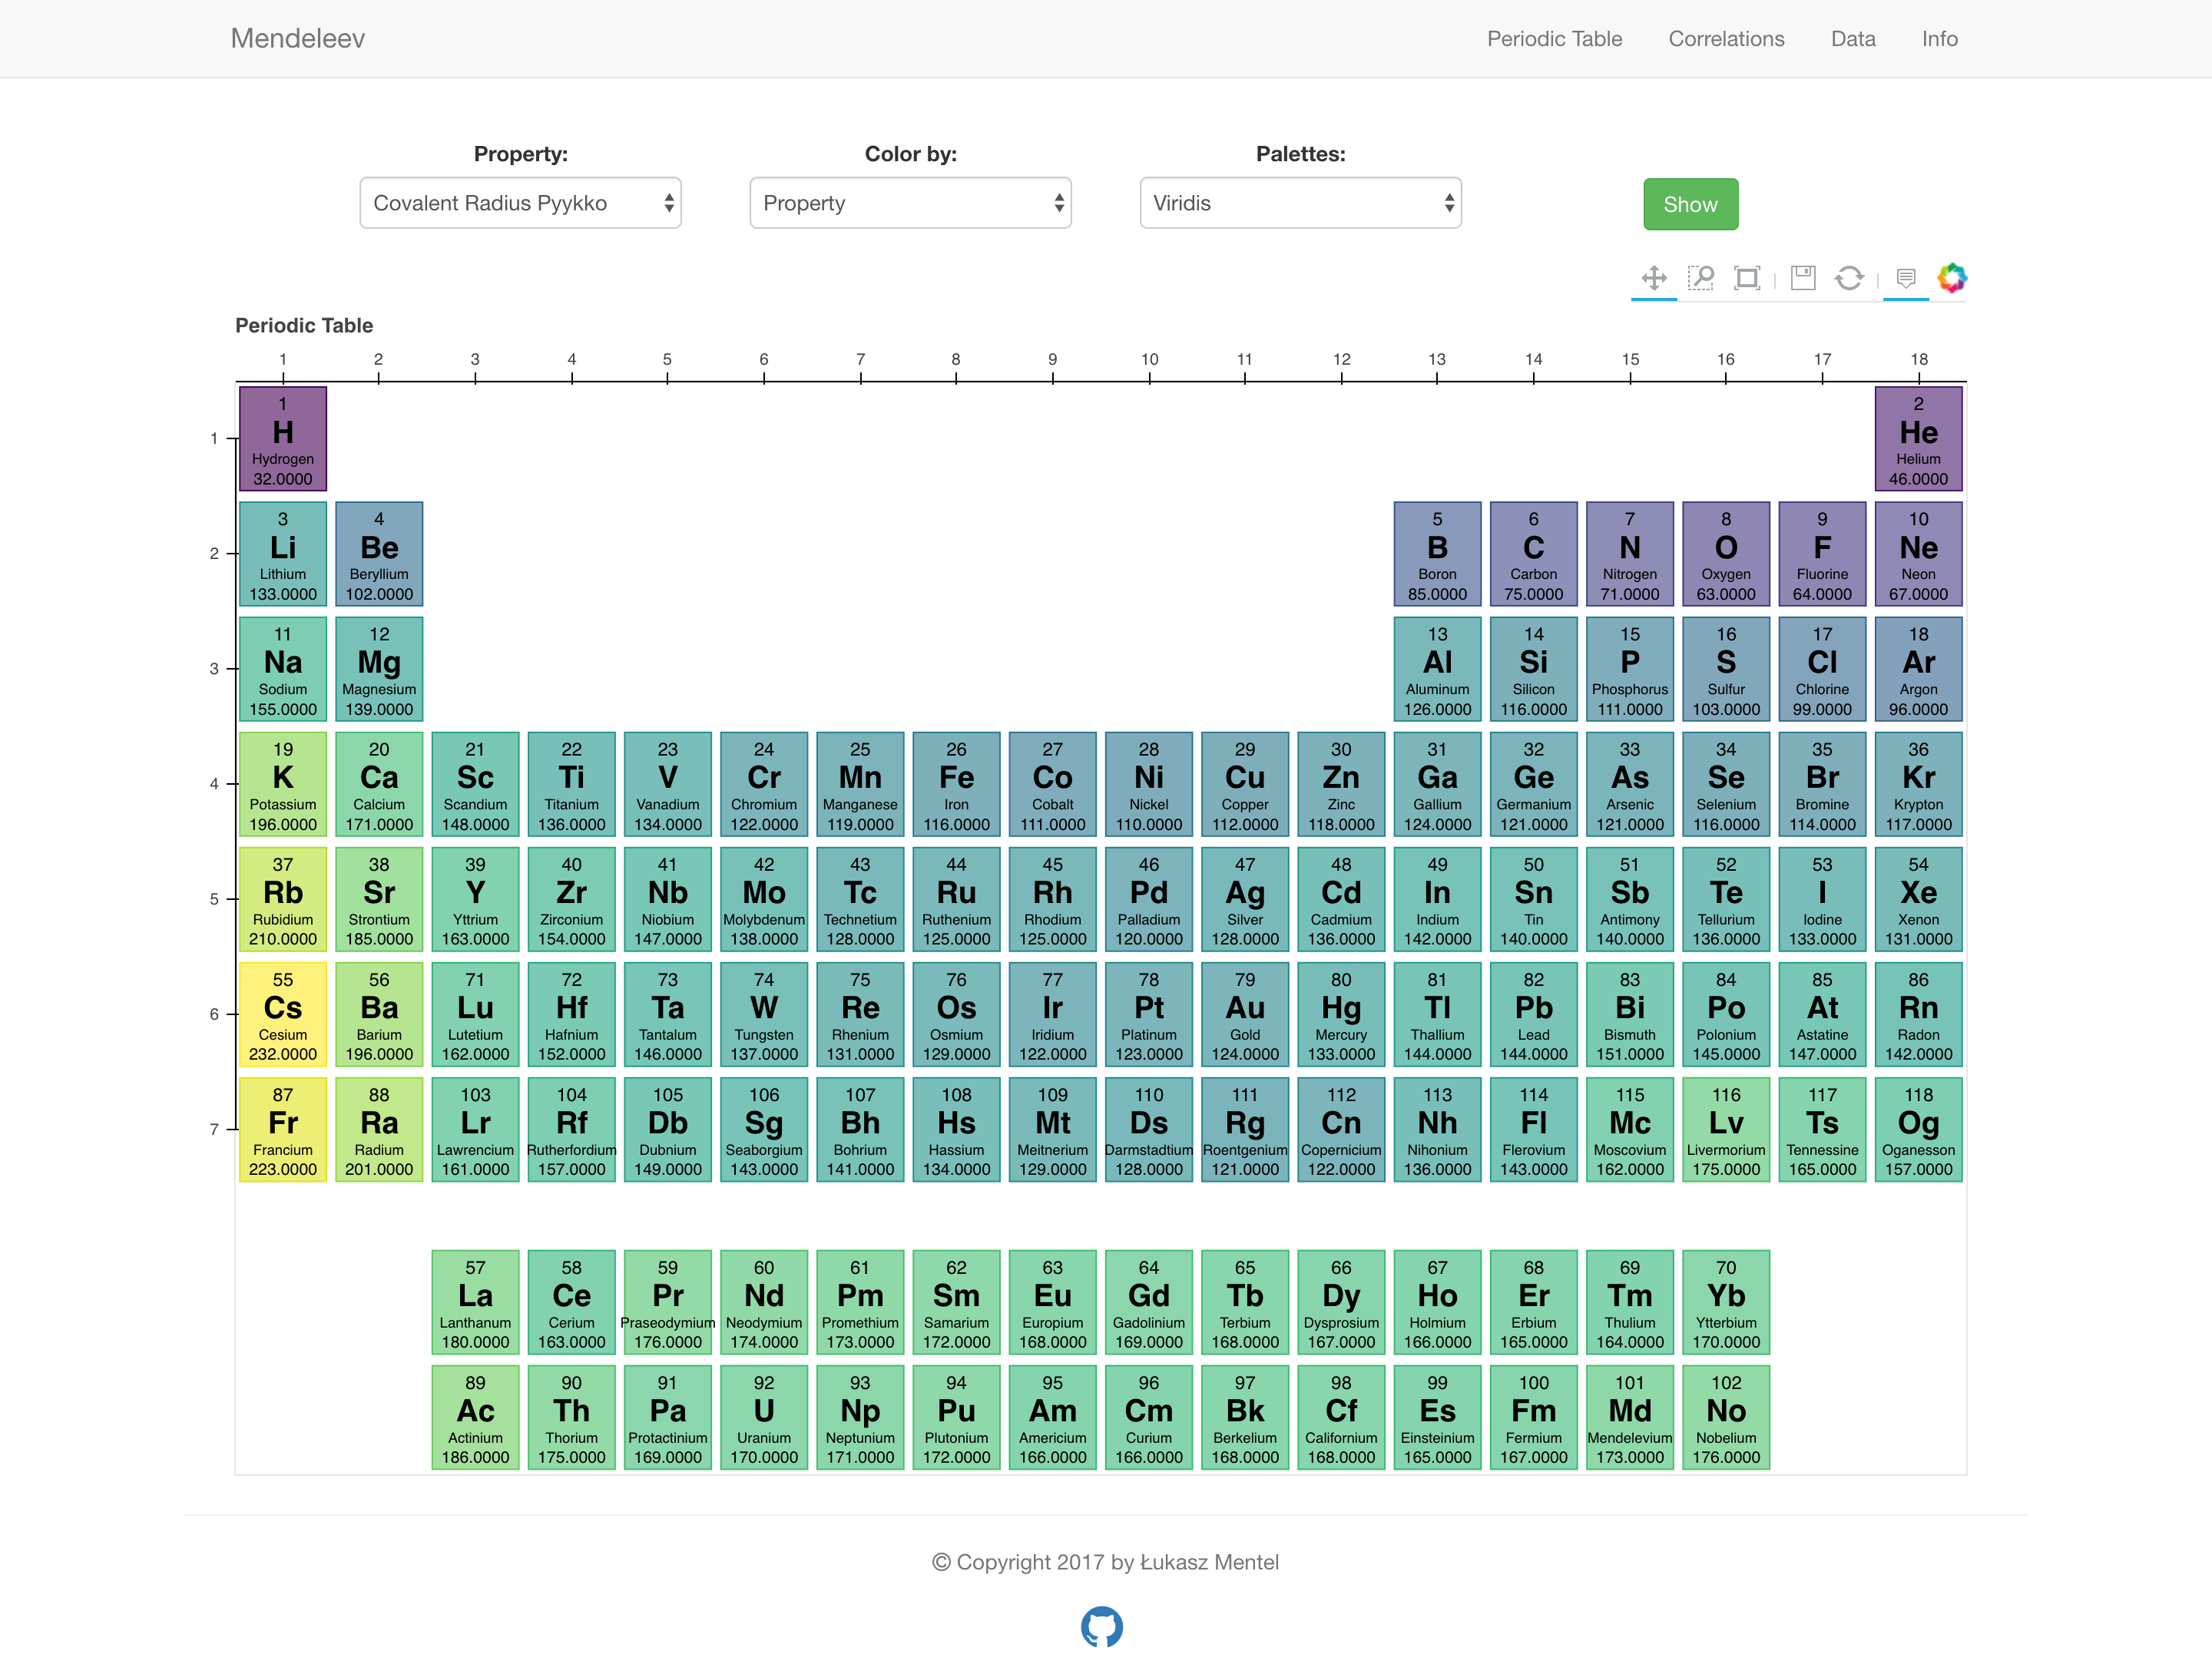 Periodic table view